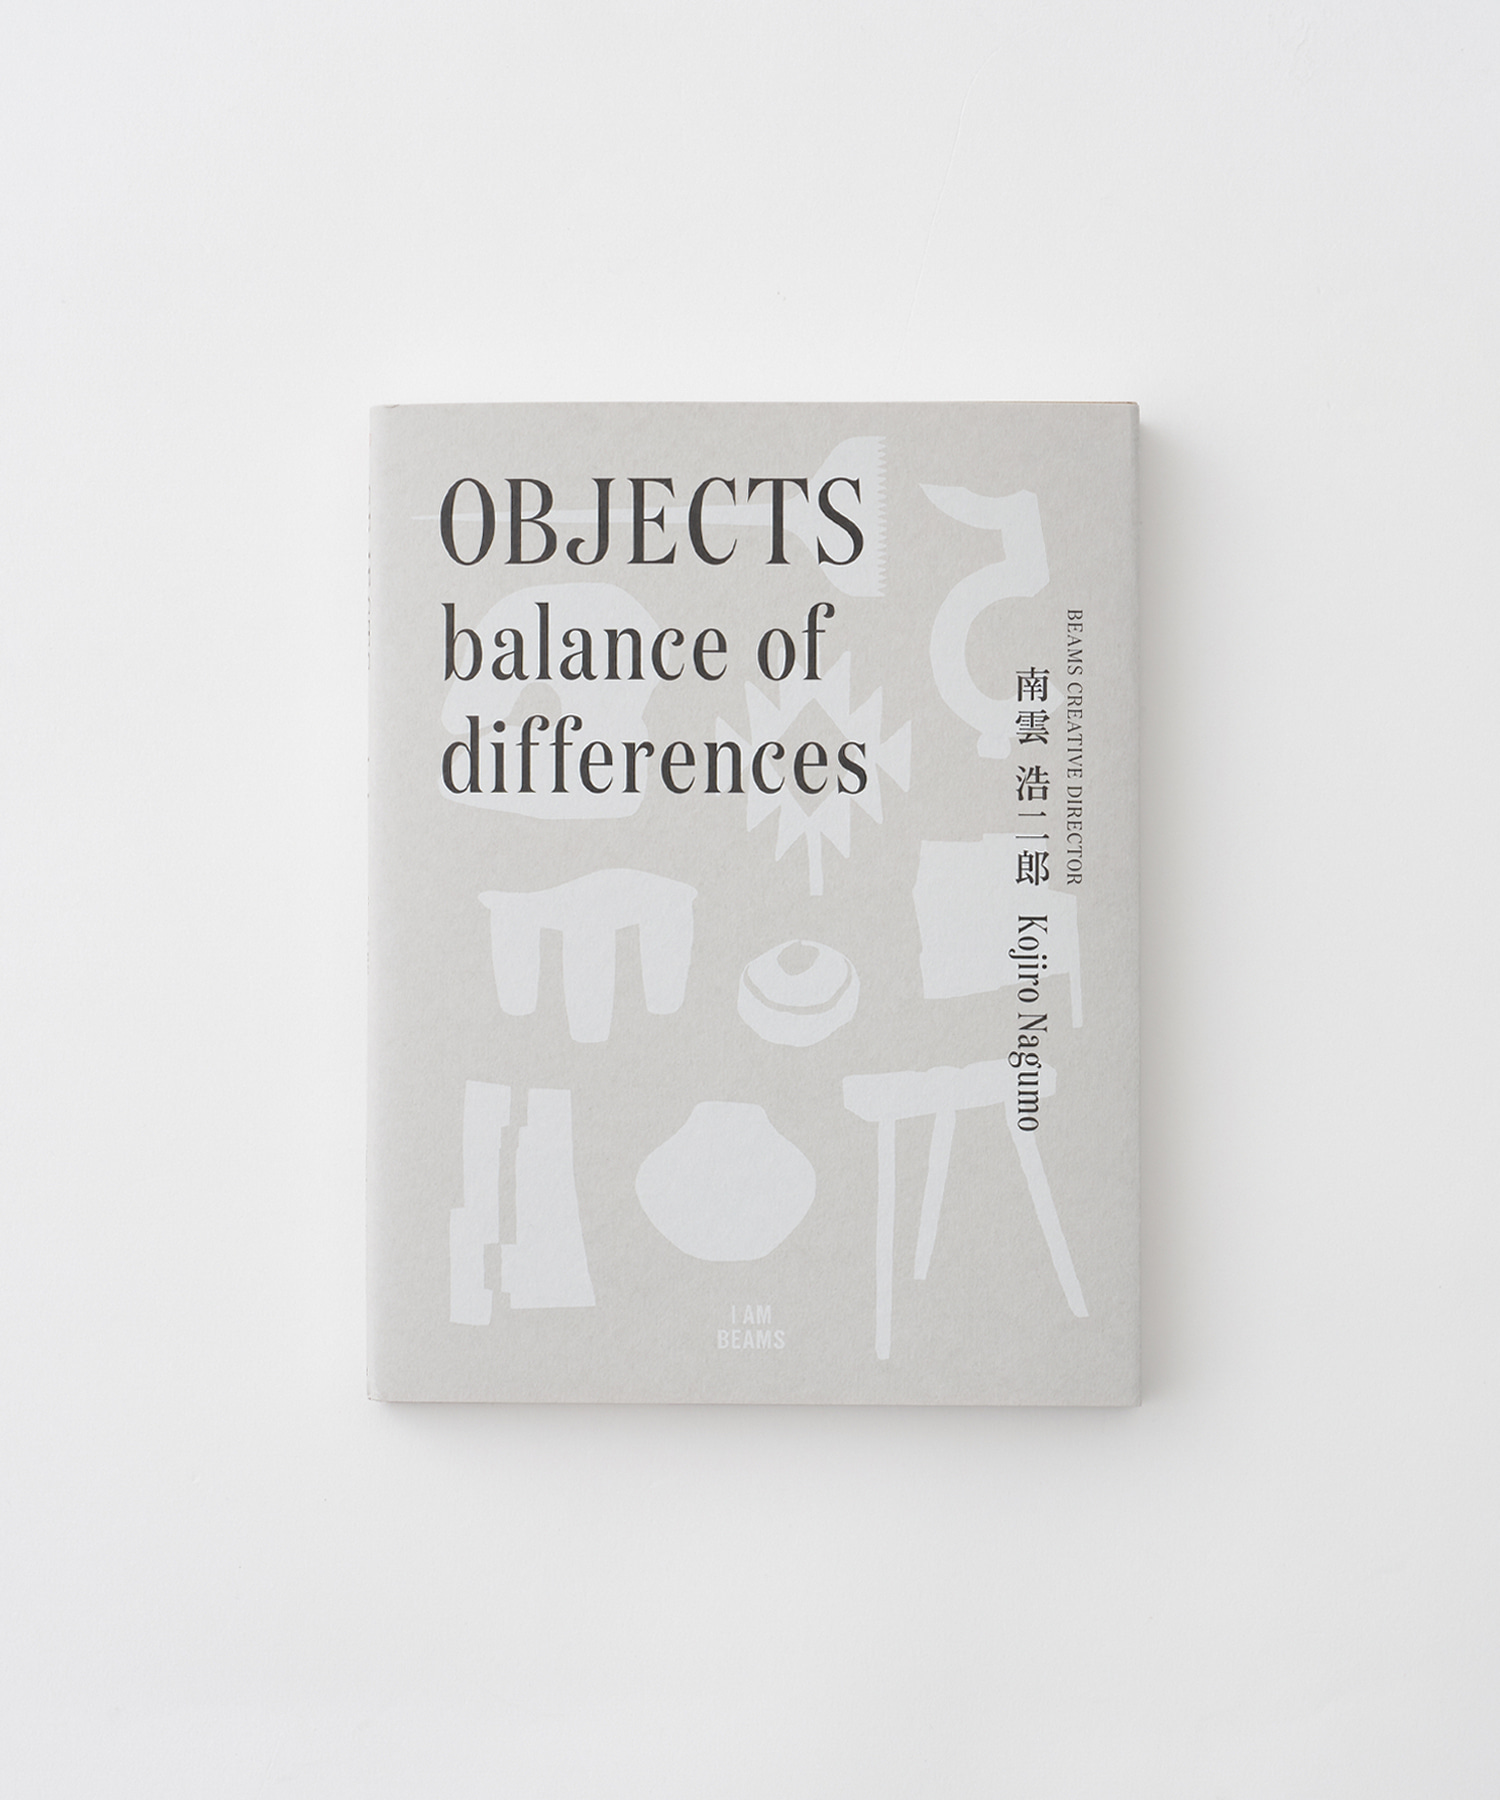 OBJECTS balance of differences (I AM BEAMS)